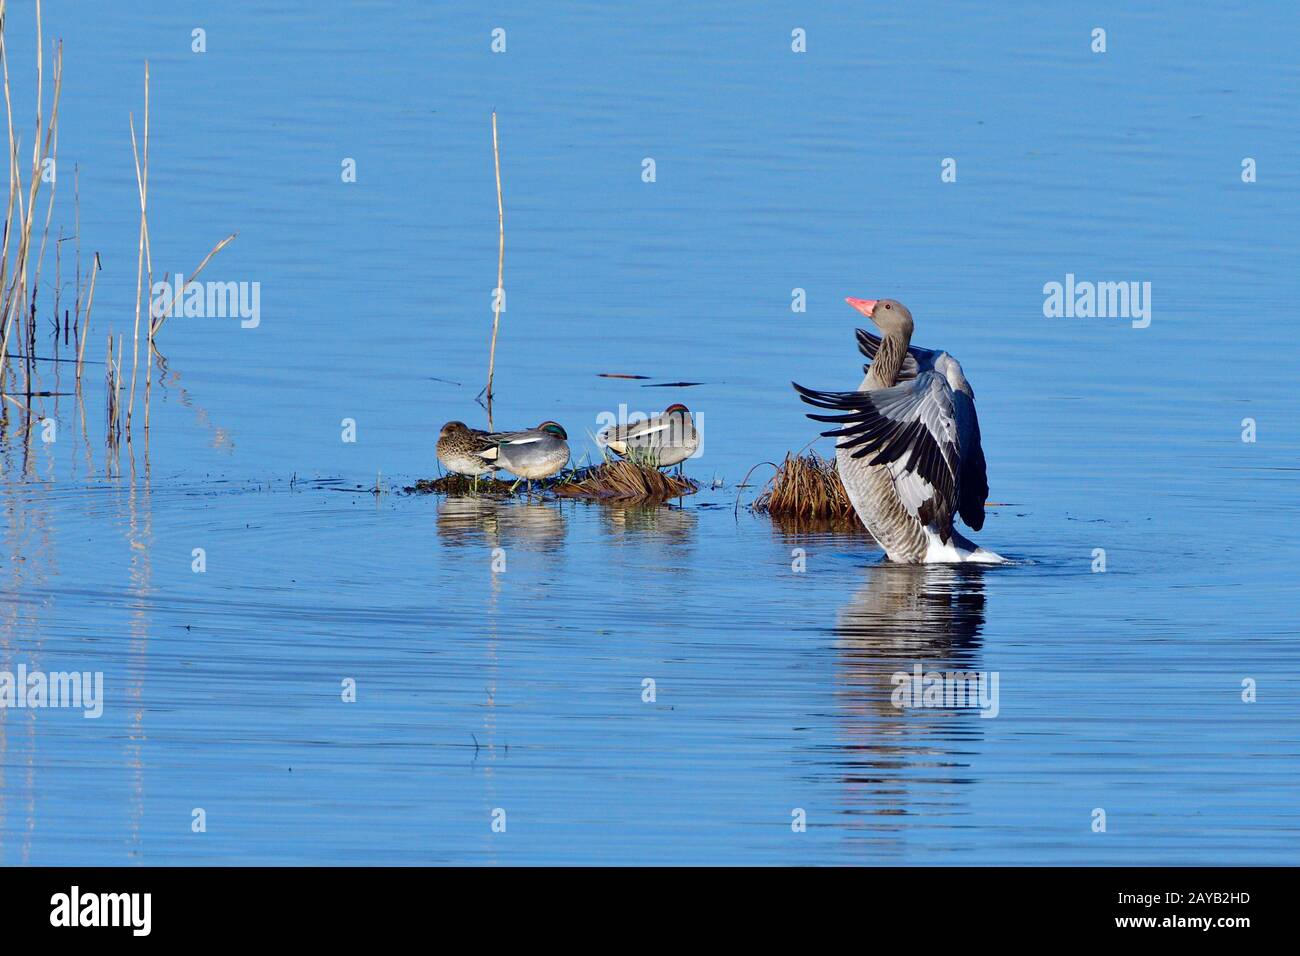 Greylag Goose and Teal Duck Stock Photo